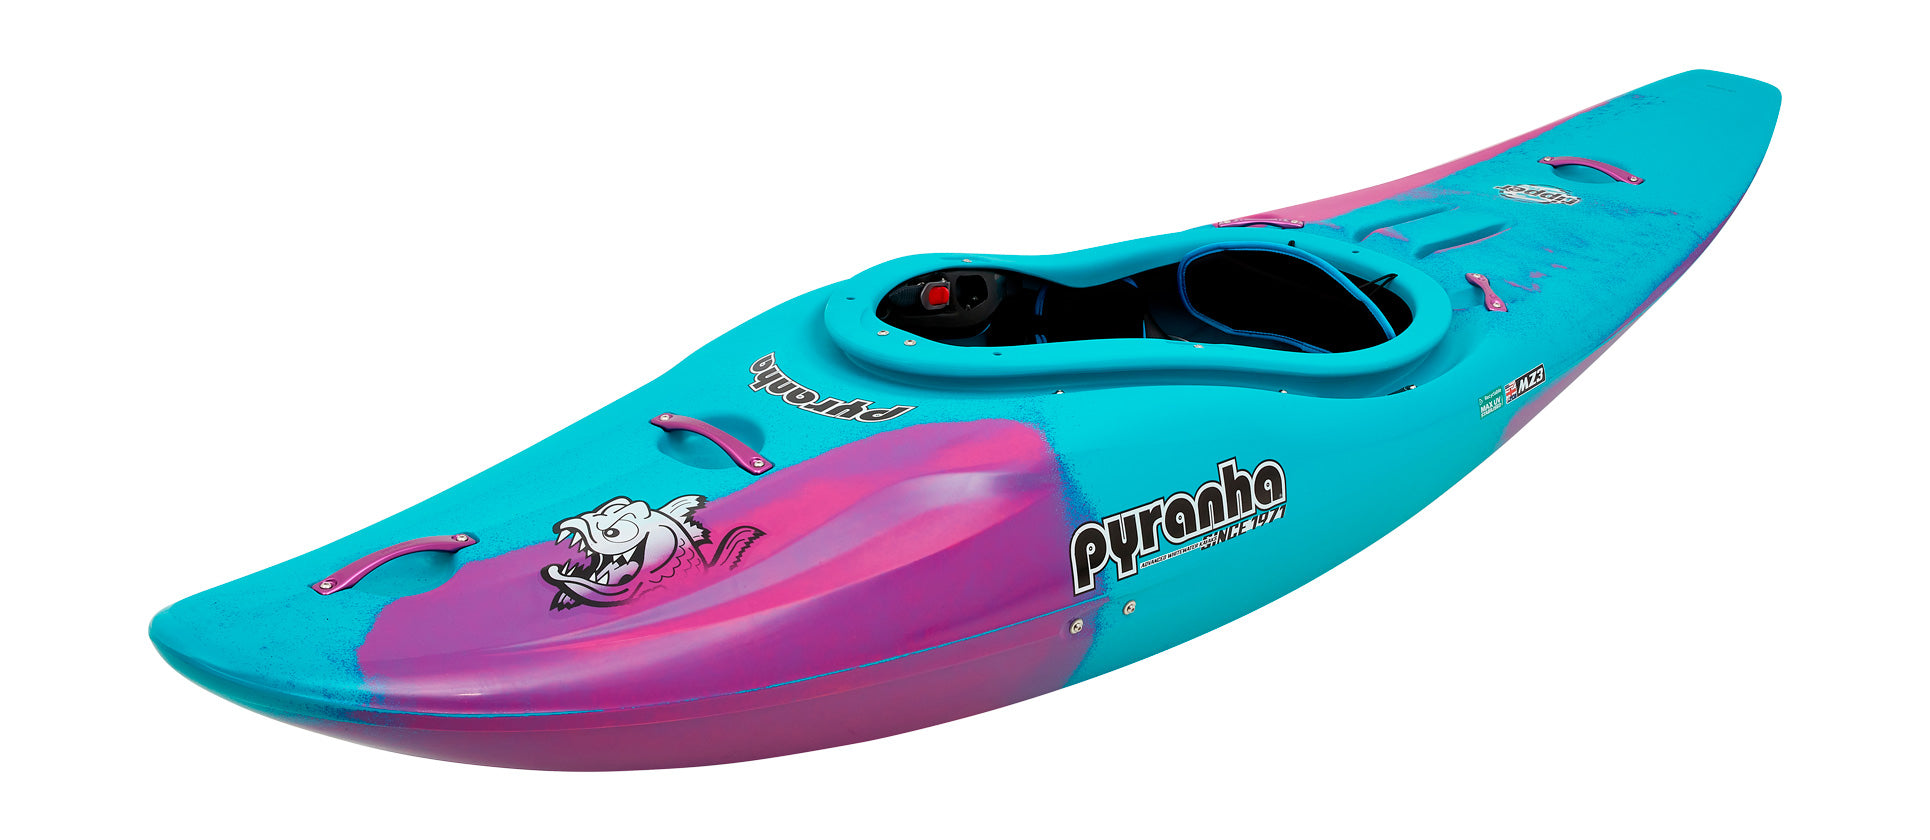 A blue and pink Pyranha Ripper 2 kayak is ideal for river running.